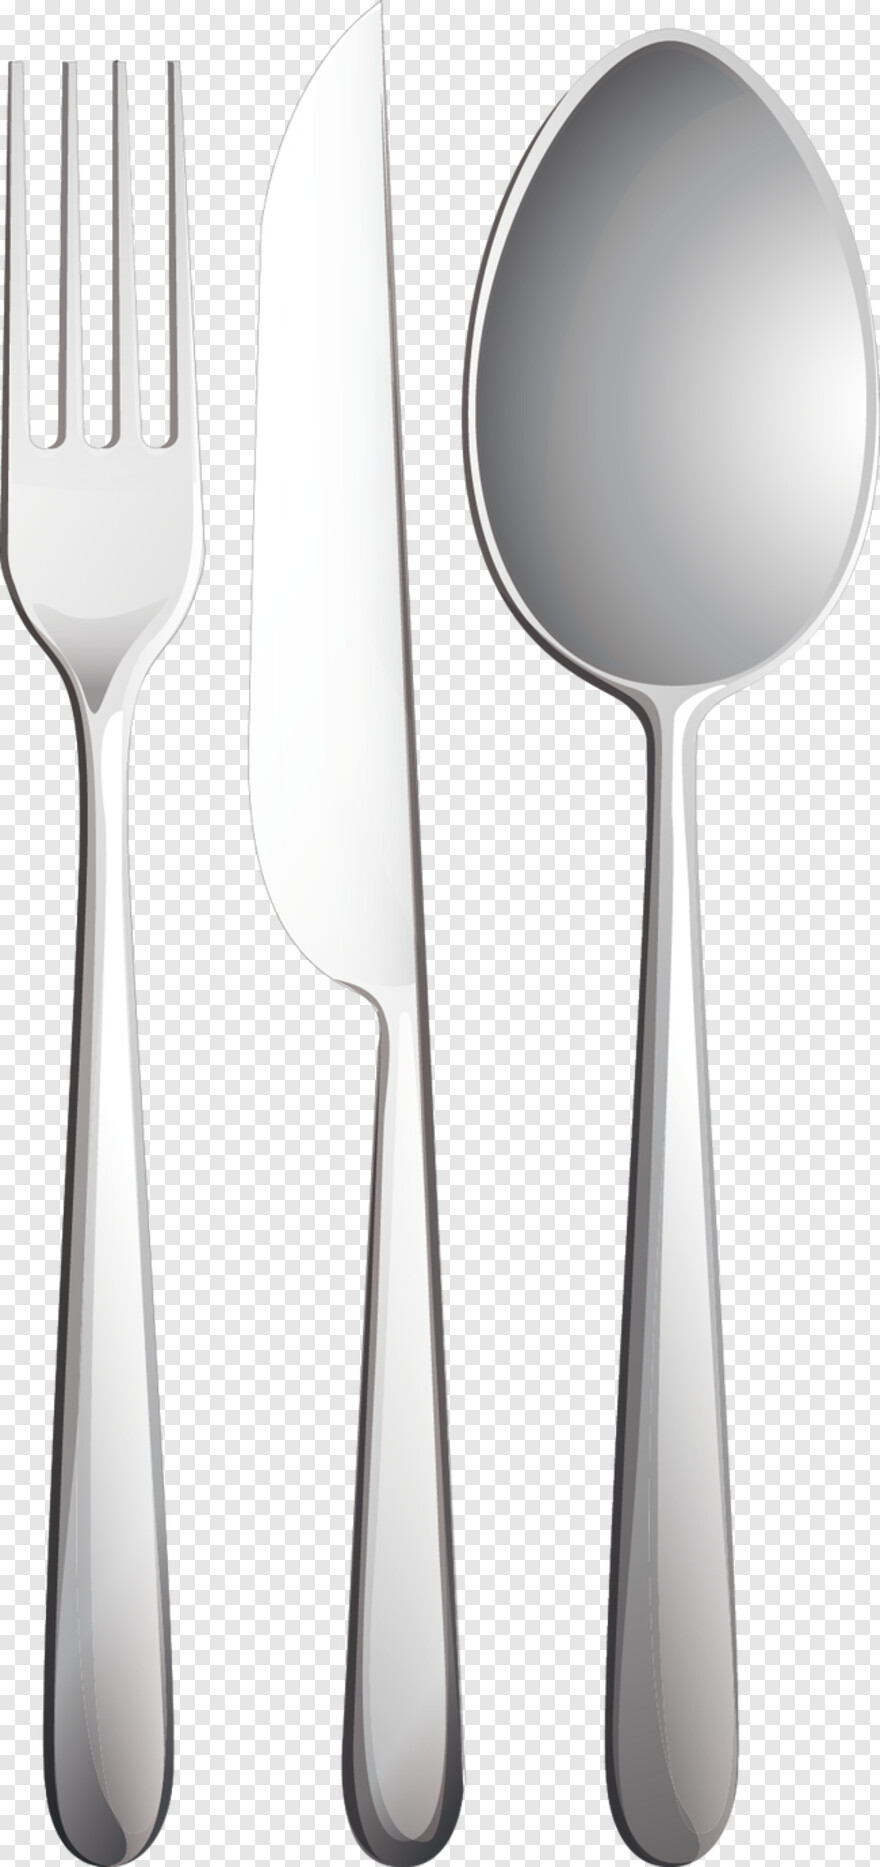 fork-and-spoon # 931848